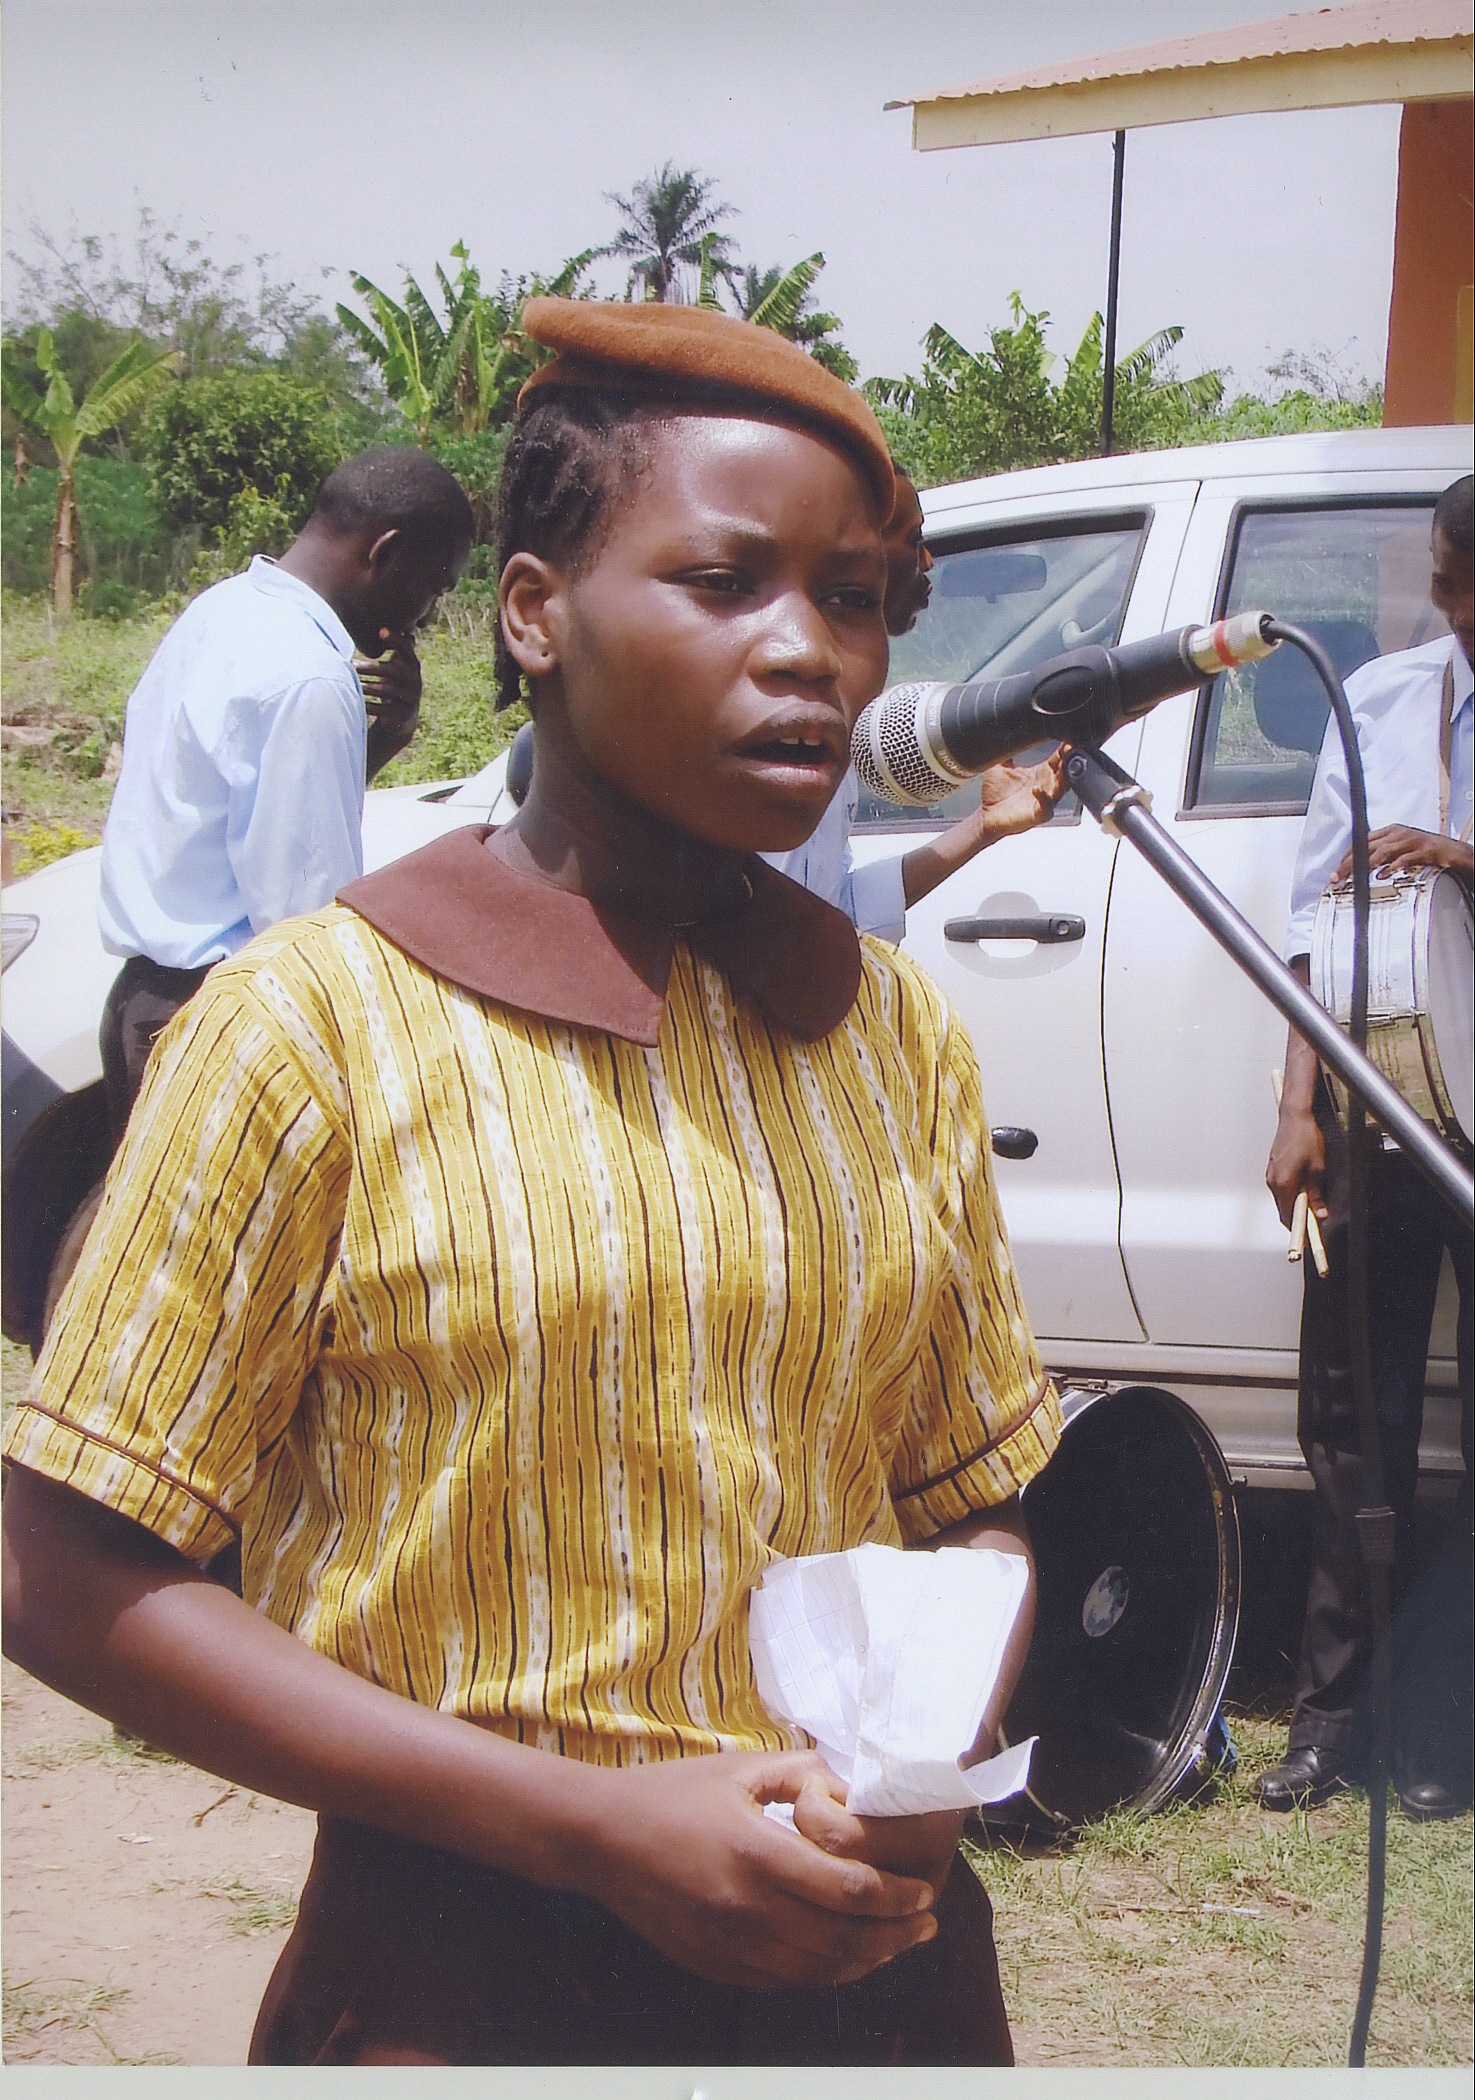 A Student At The Newly Opened School - Giving A Speech On Behalf Of The Student